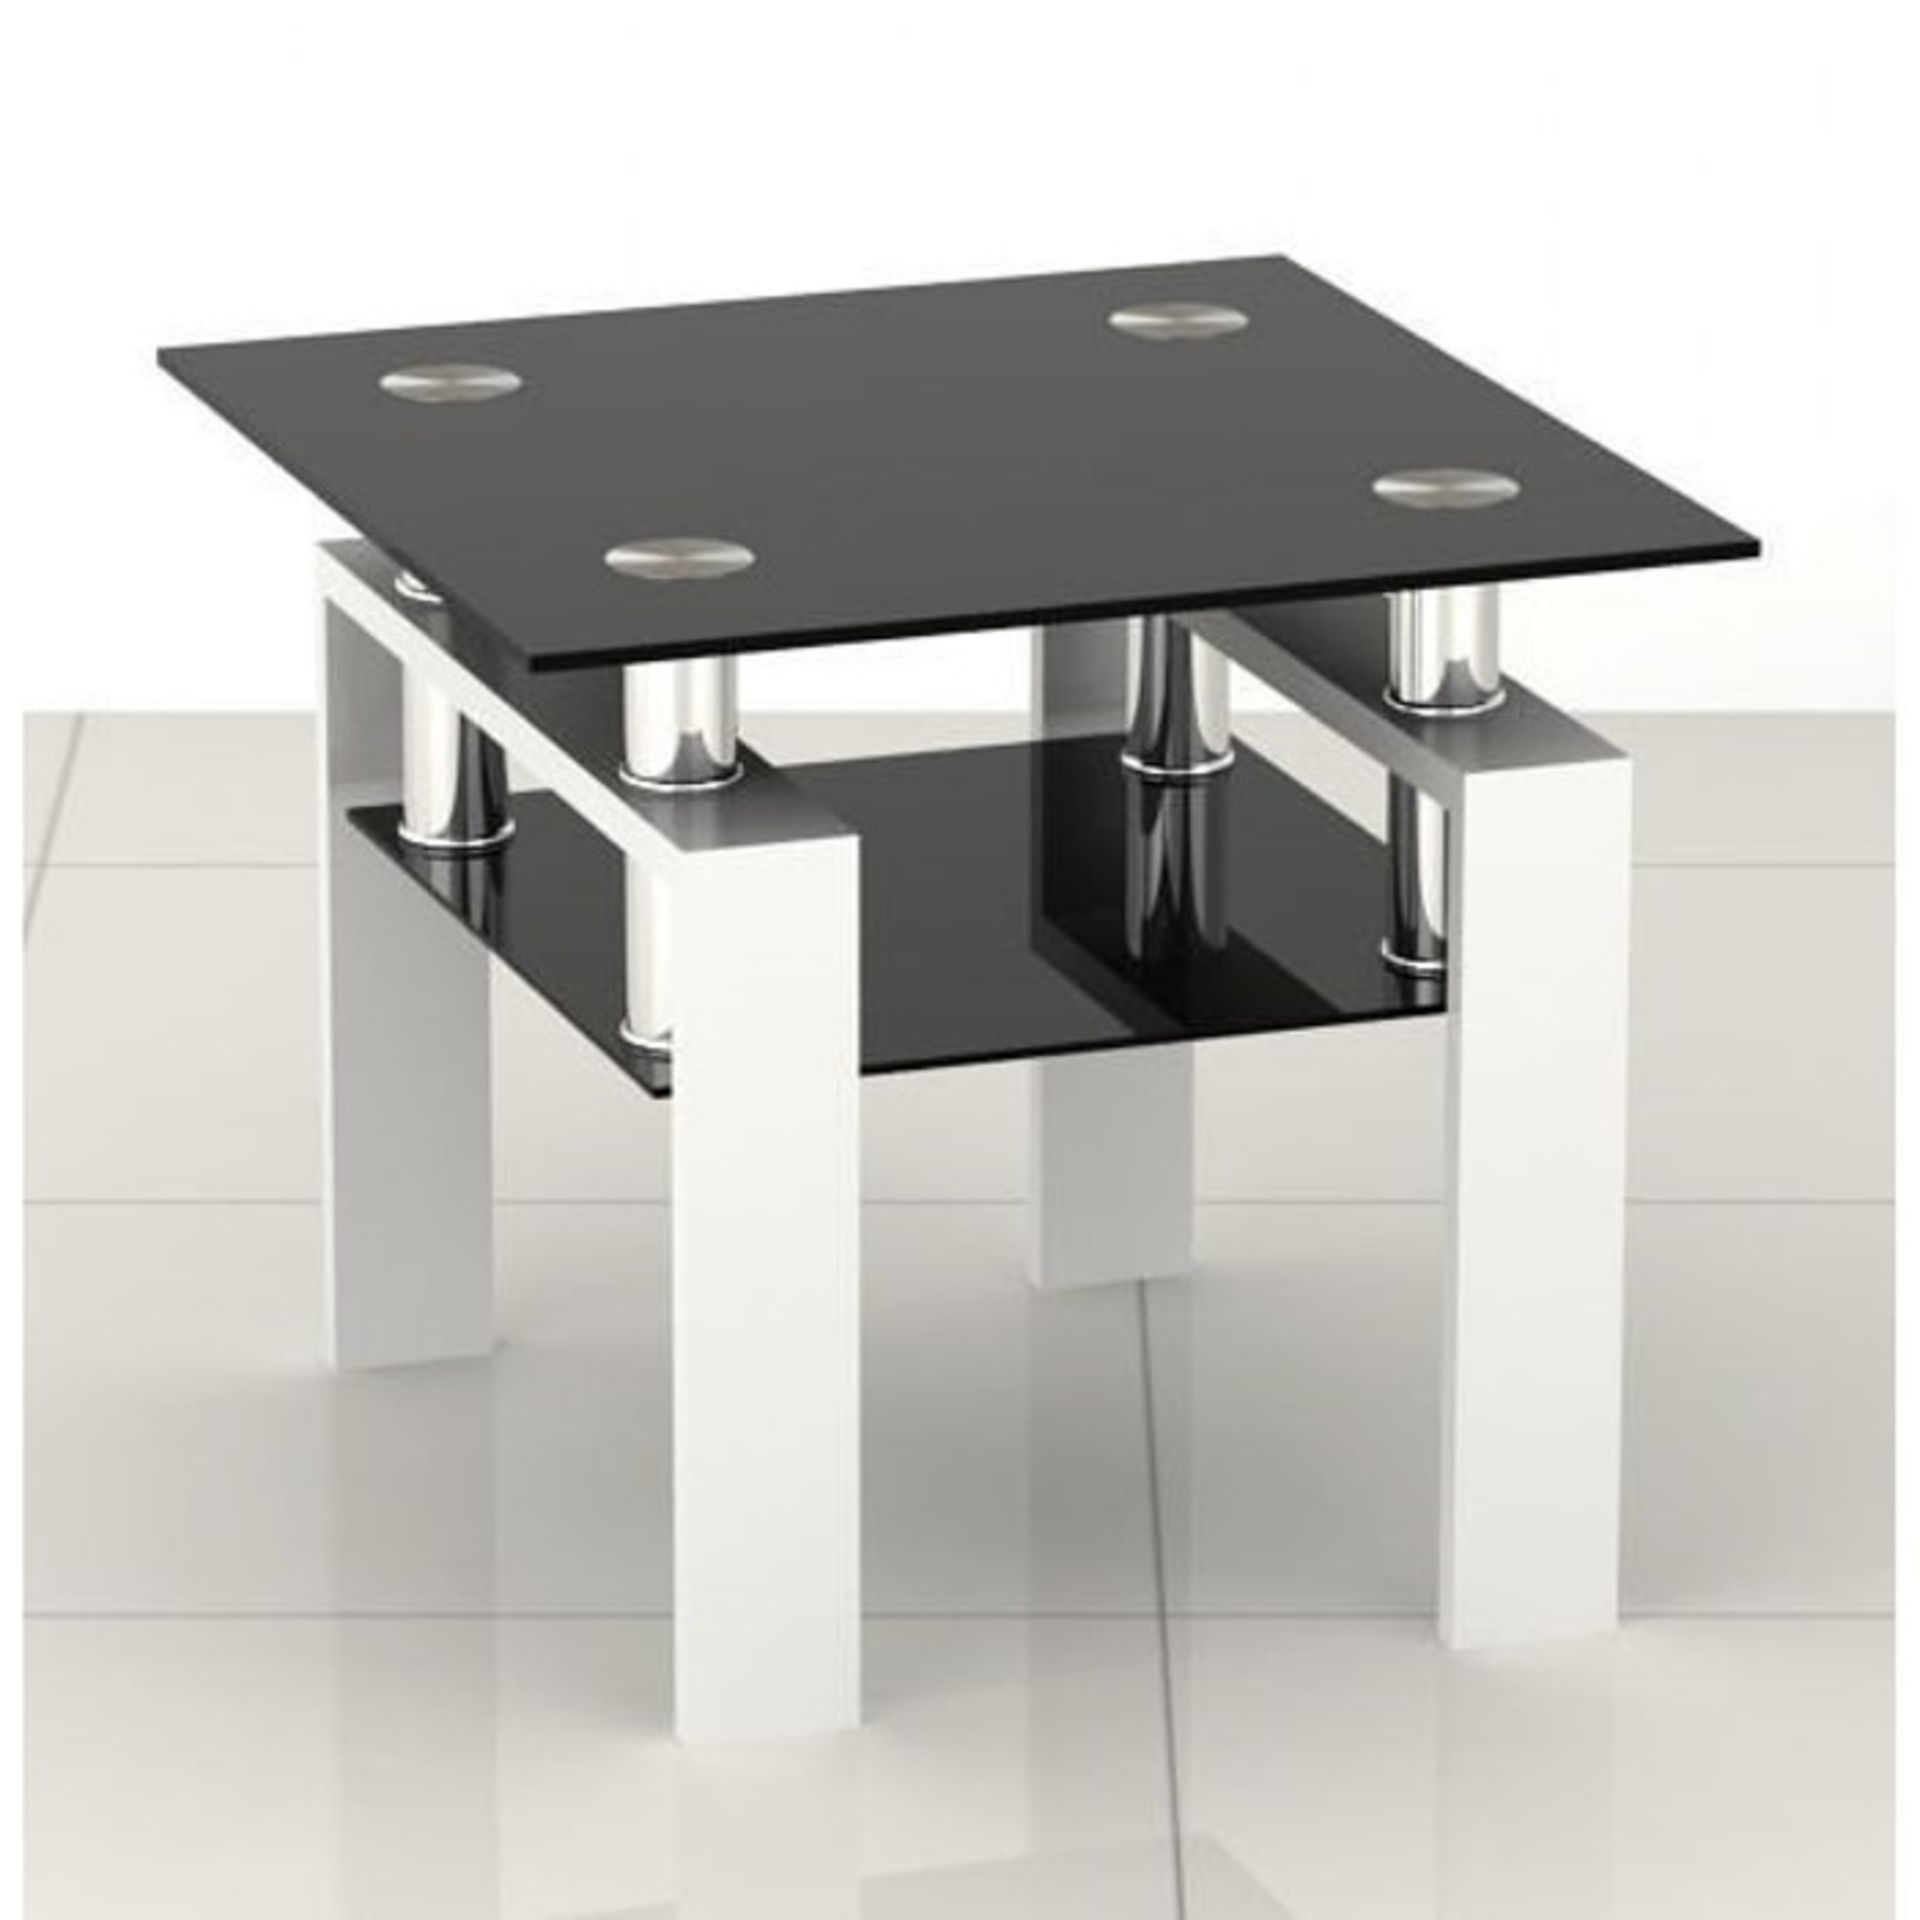 1 BRAND NEW BOXED COFFEE TABLE/LAMP TABLE WITH WHITE HIGH GLOSS LEGS, CHROME POSTS AND BLACK GLASS /